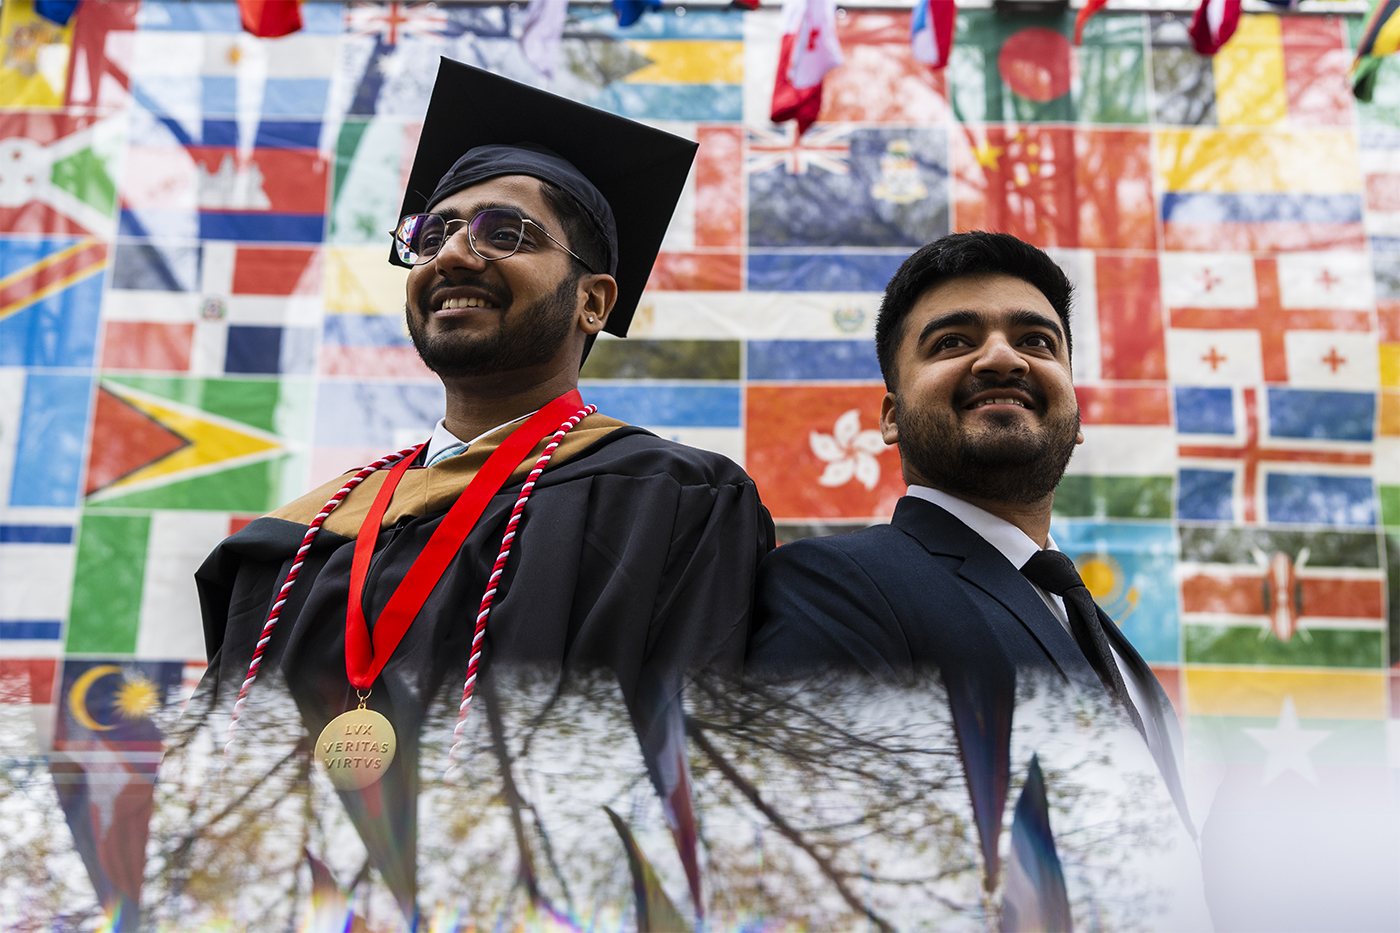 Two students, including one in cap and gown, pose against a backdrop of international flags